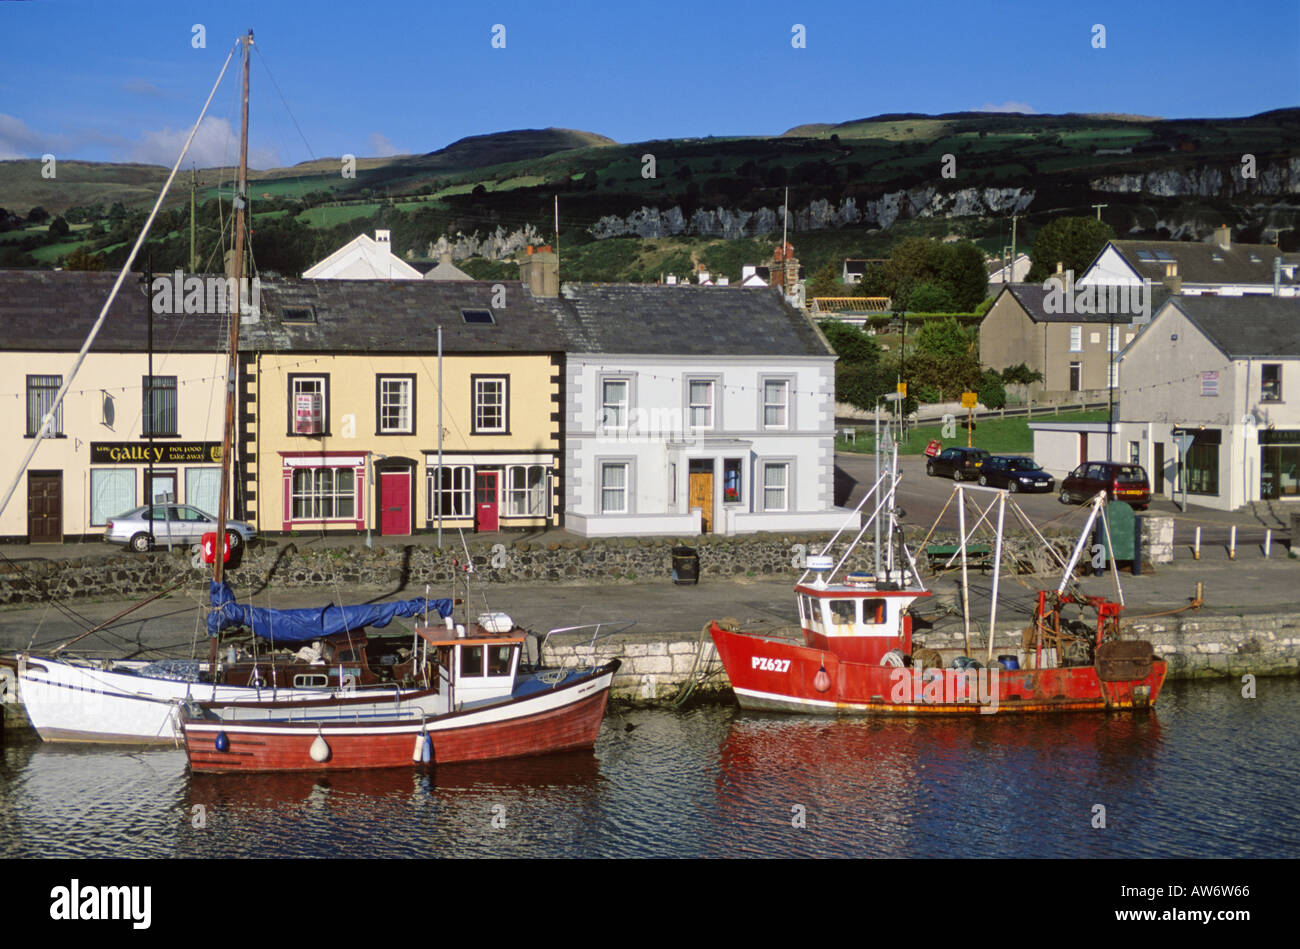 A harbor scene in Carnlough along the Antrim Coast in Northern Ireland. Stock Photo